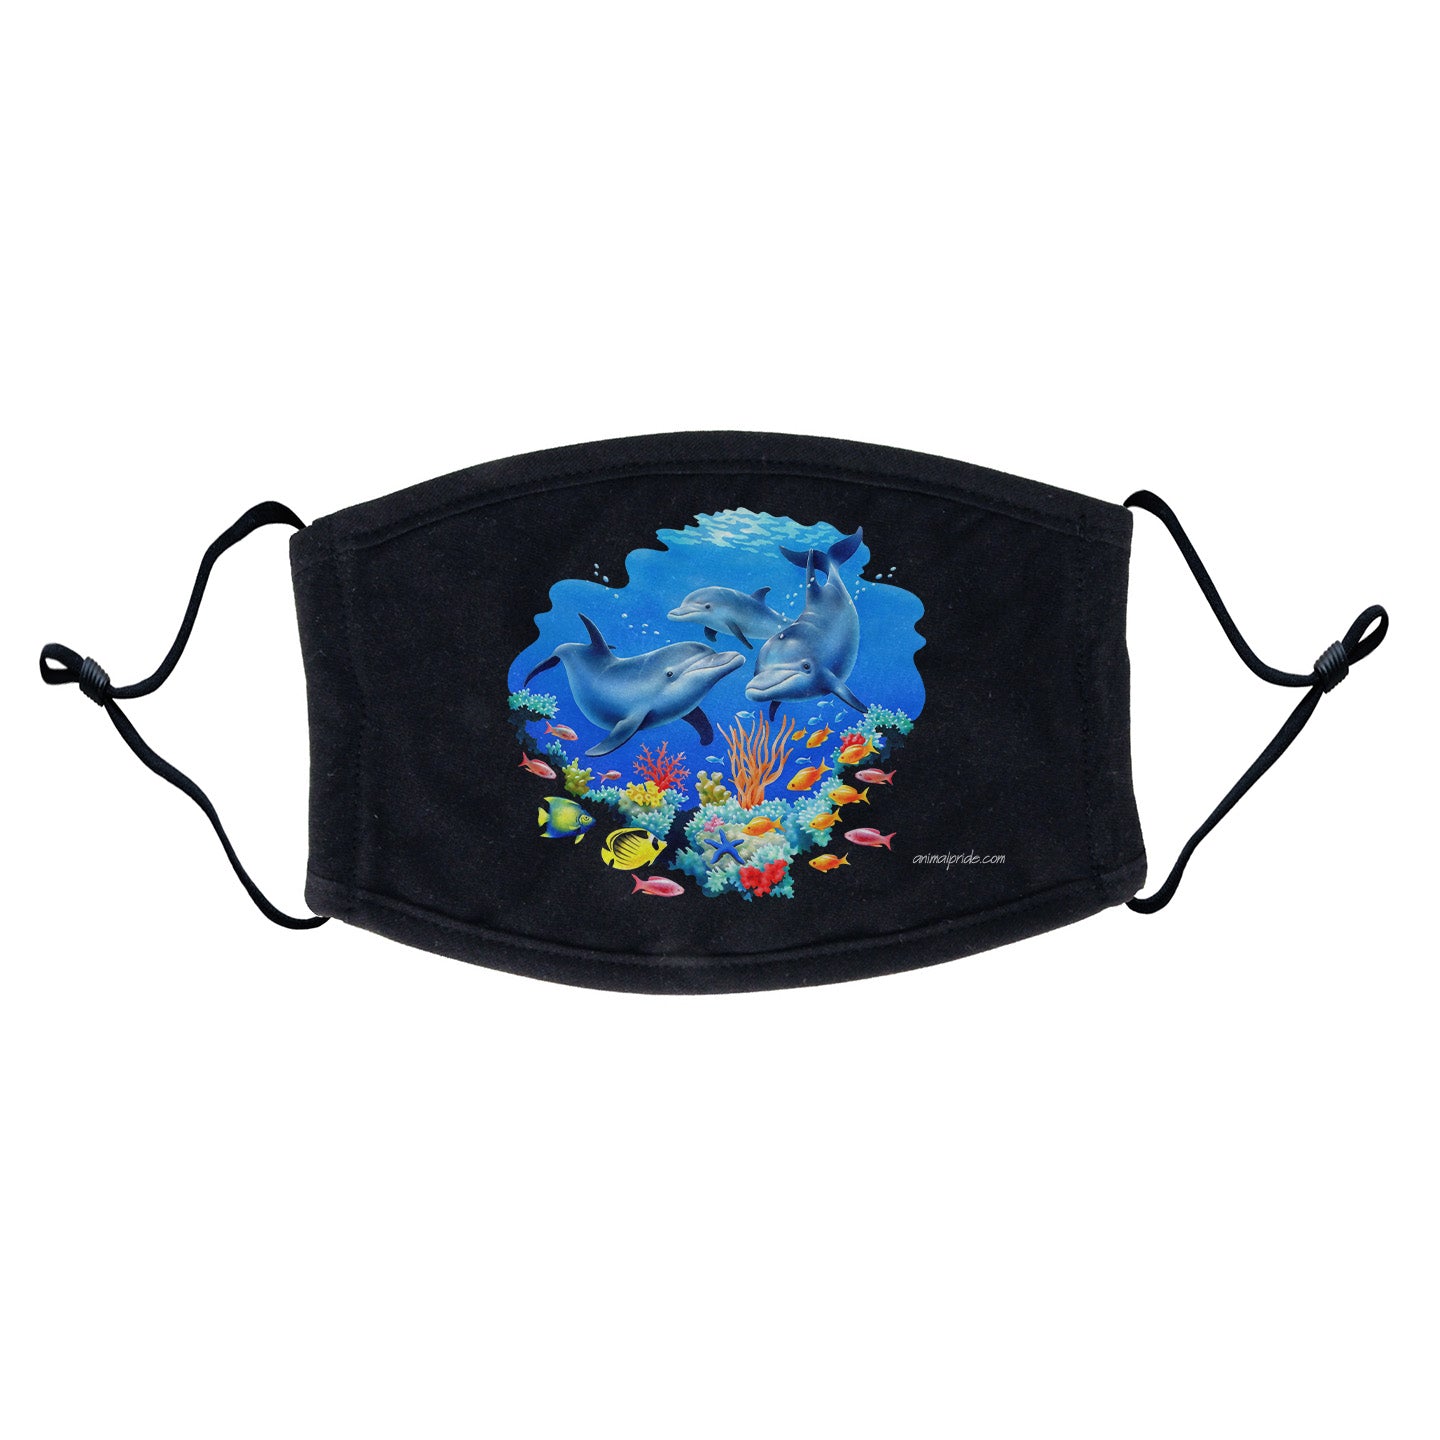 Dolphin Reef Face Mask - Adjustable Ear Loops, Reusable & Washable, Cloth - Animal Pride